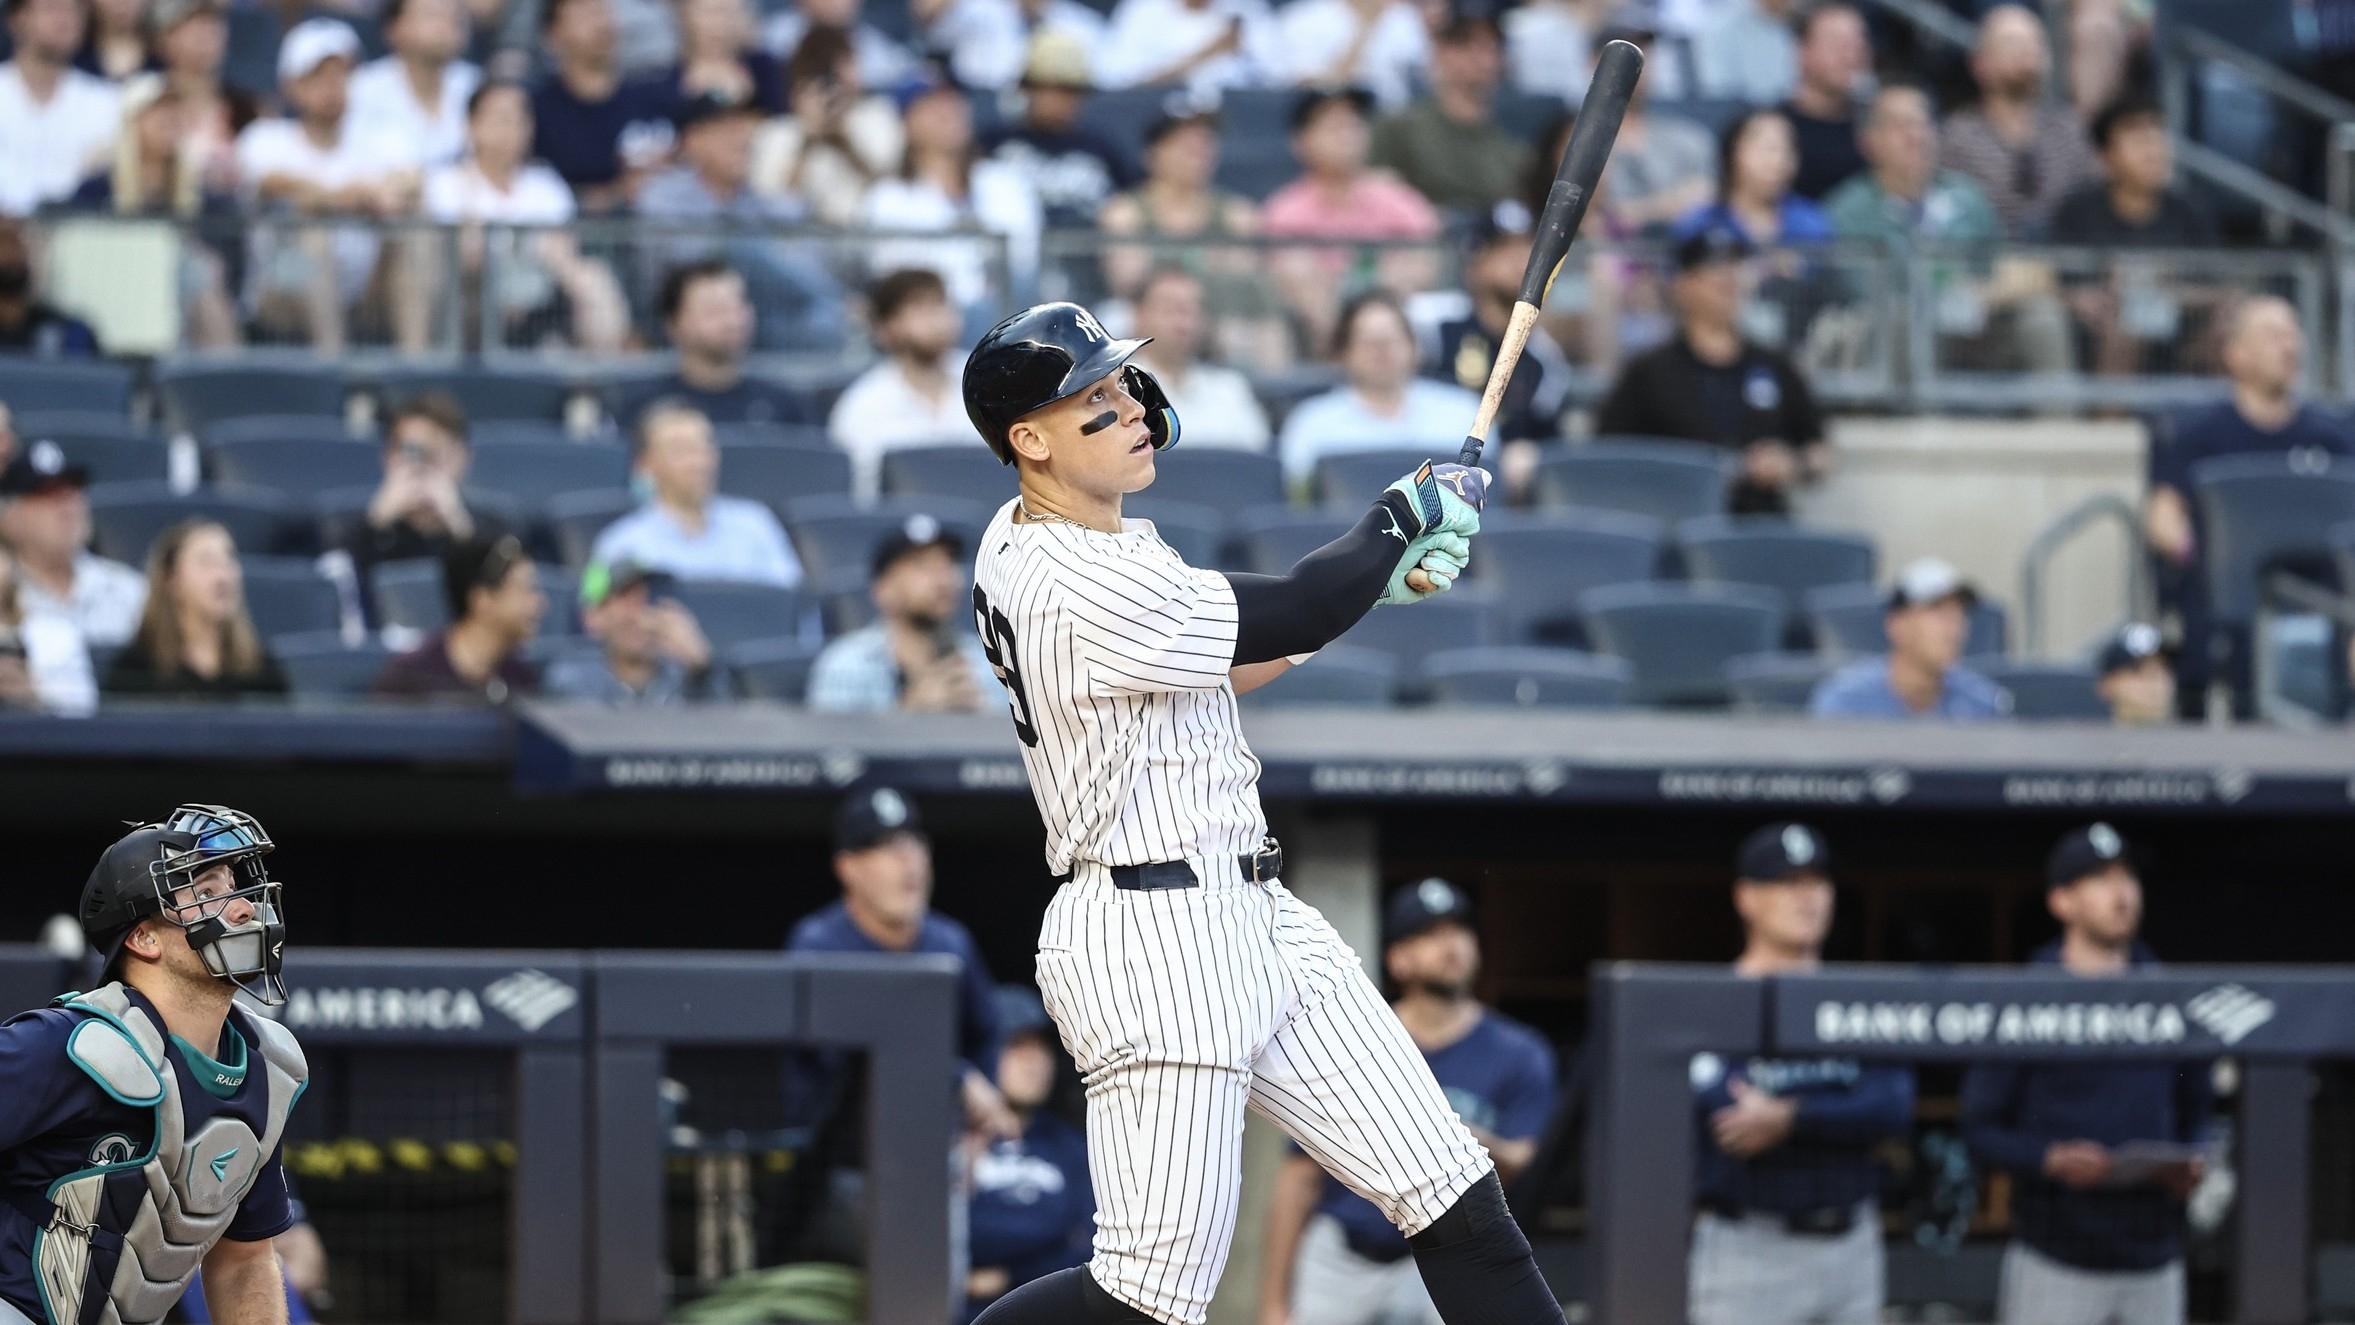 New York Yankees center fielder Aaron Judge (99) hits a two run home run in the first inning against the Seattle Mariners at Yankee Stadium. / Wendell Cruz-USA TODAY Sports